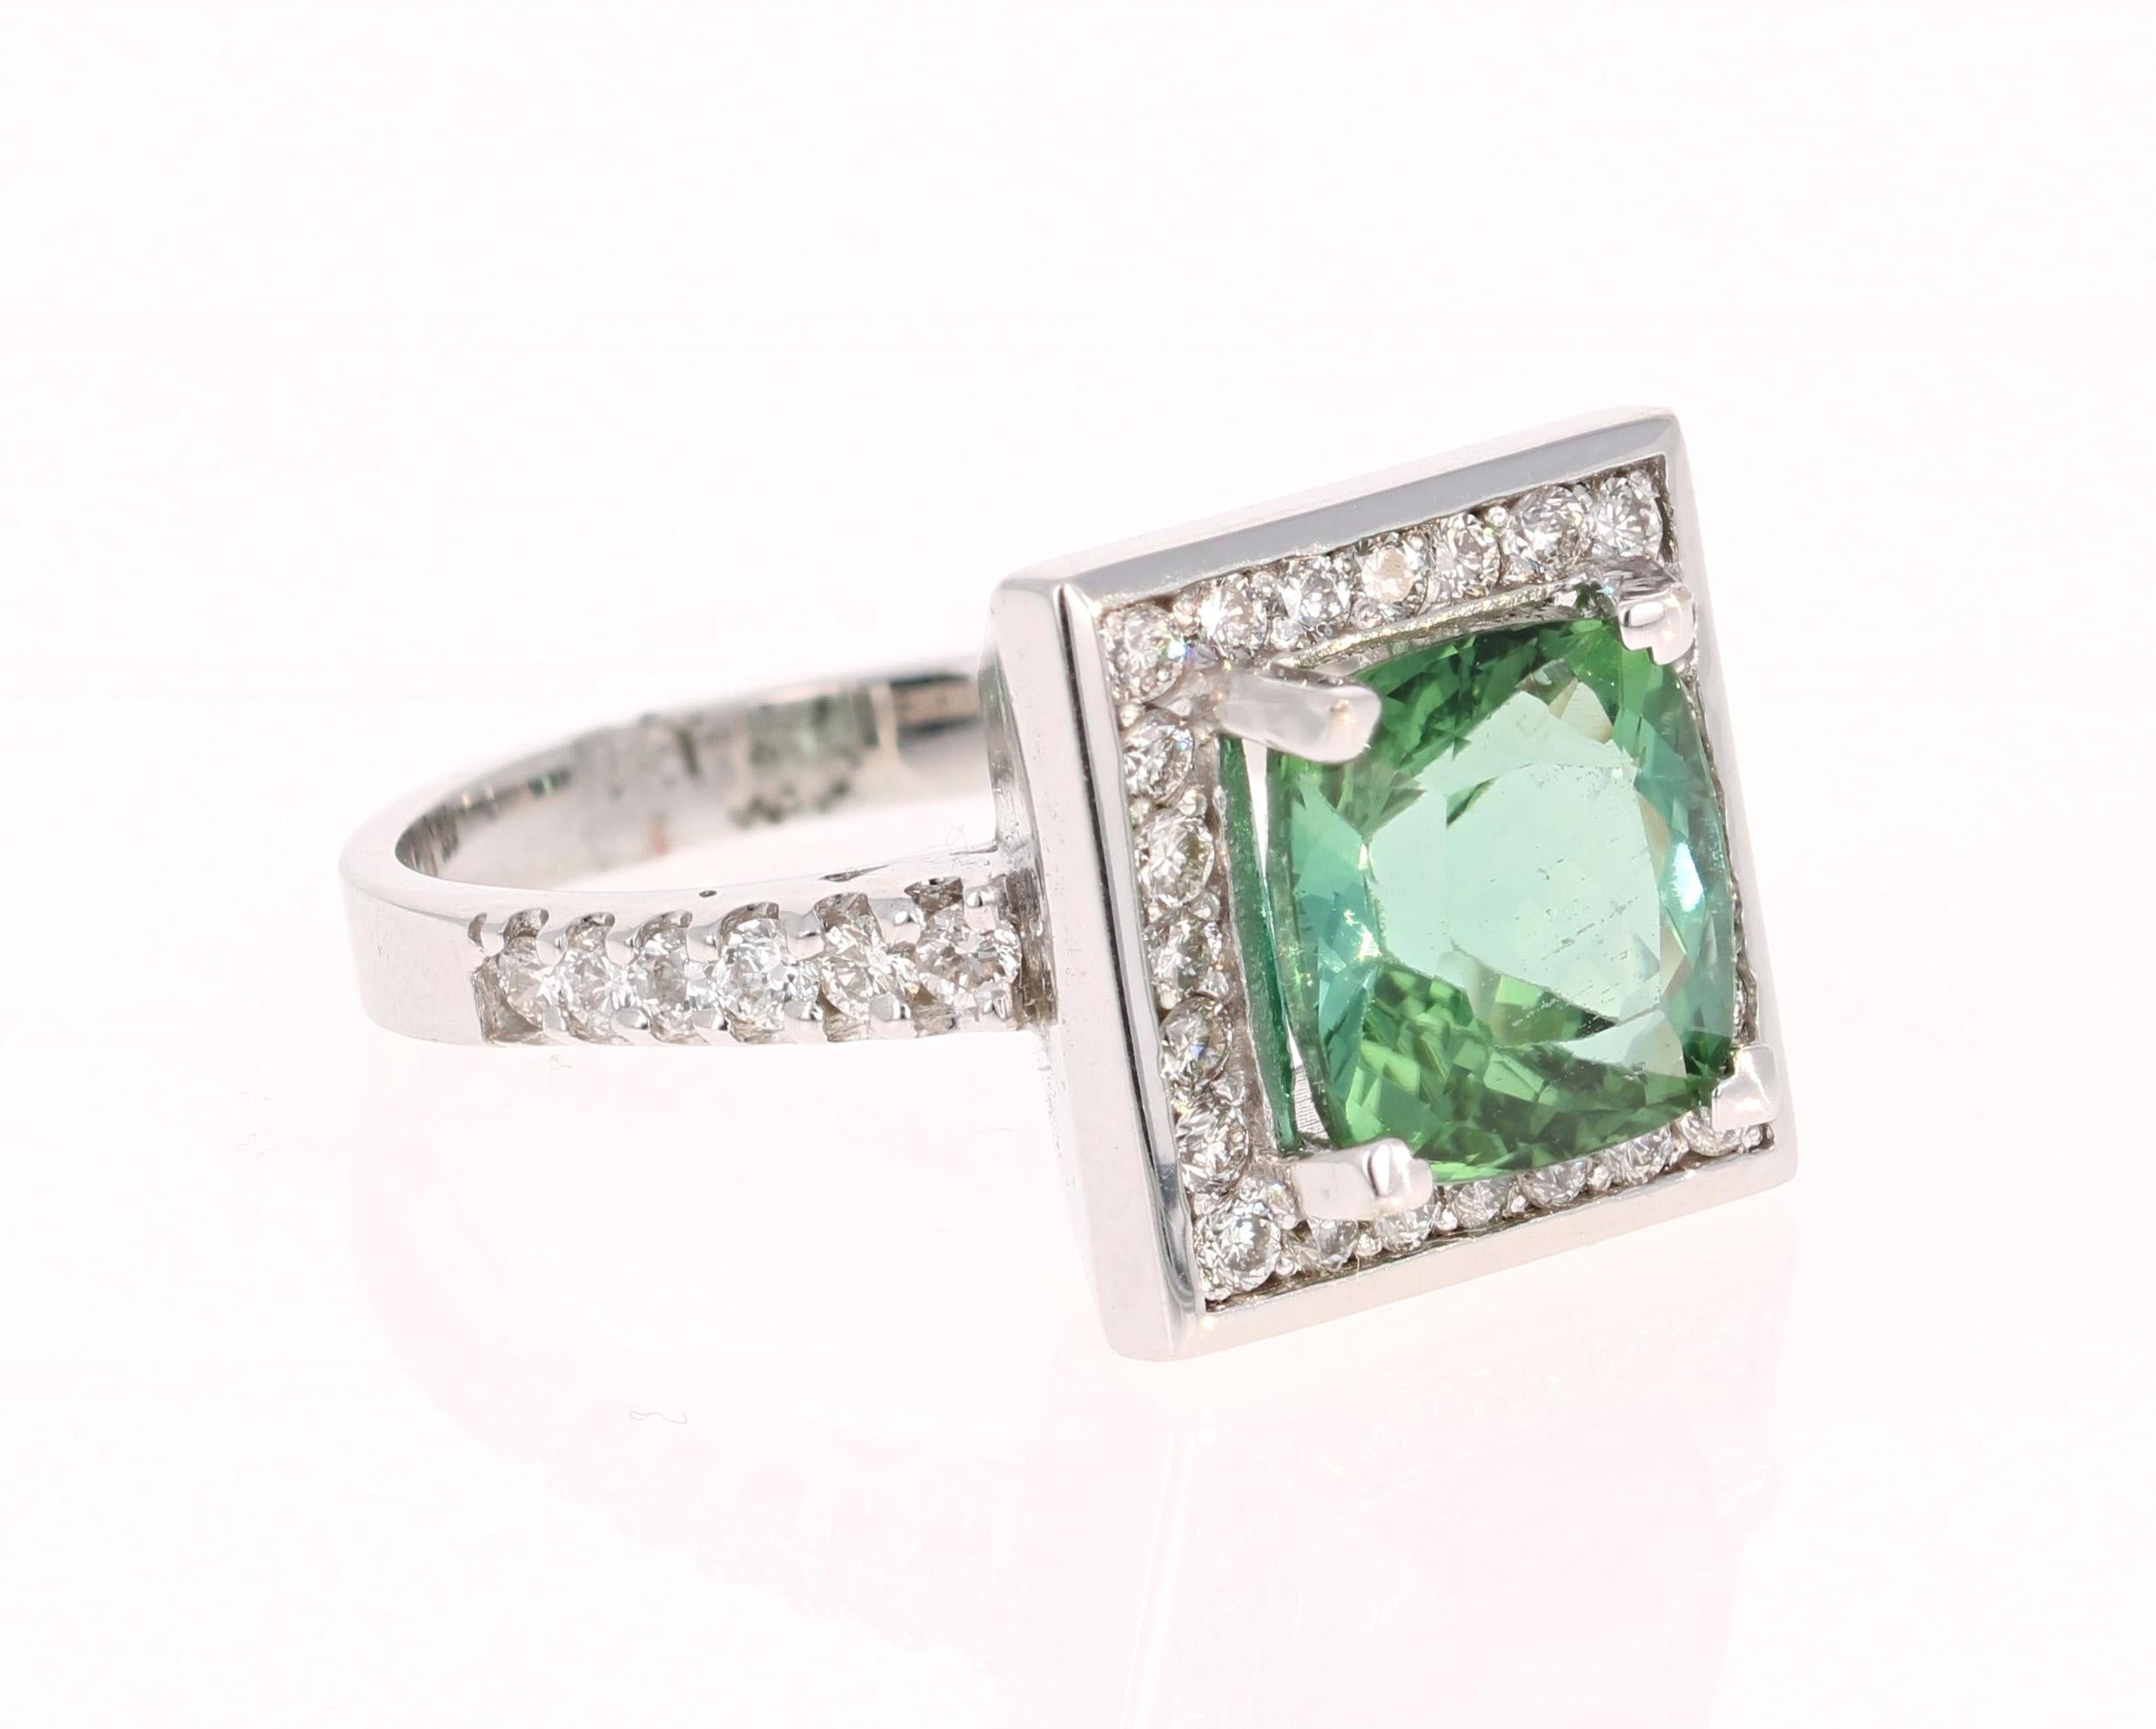 A beauty that is sure to be nothing less than a statement! 

This ring has a magnificently beautiful Cushion Cut Green Tourmaline that weighs 3.14 Carats and has 36 Round Cut Diamonds weighing 0.67 Carats with a clarity and color of VS-F. The total